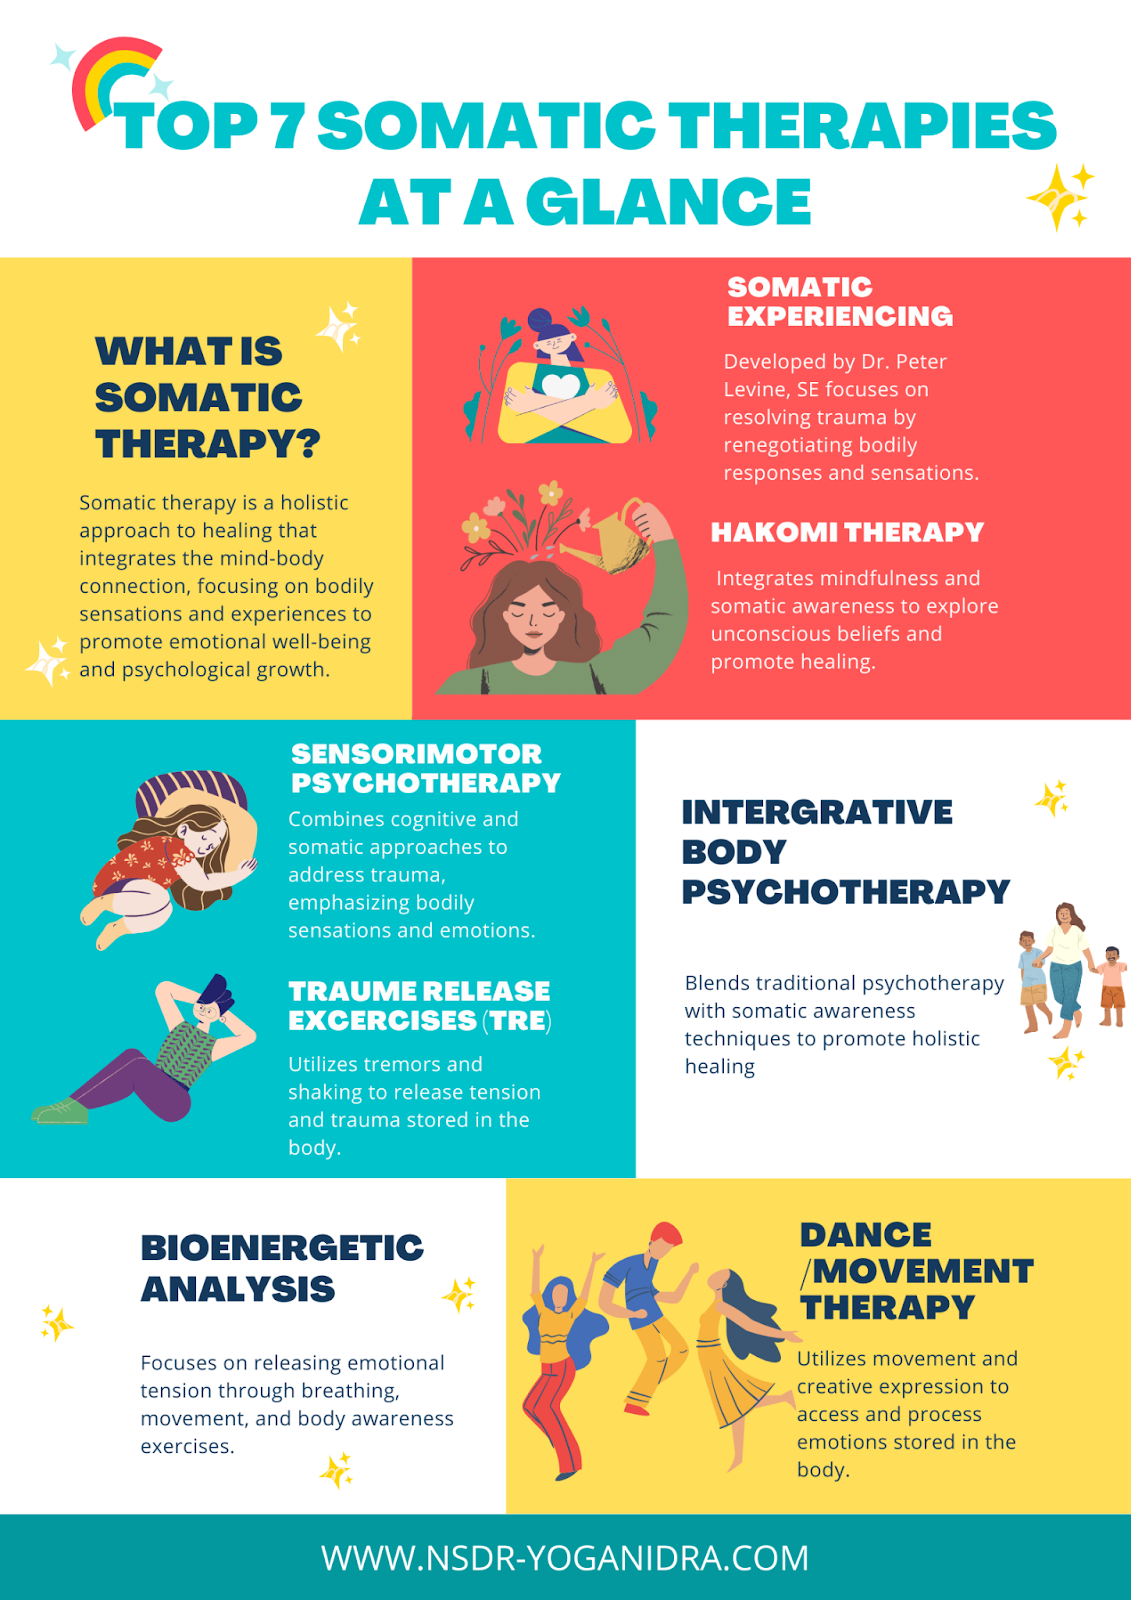 Top 7 somatic therapies at a glance